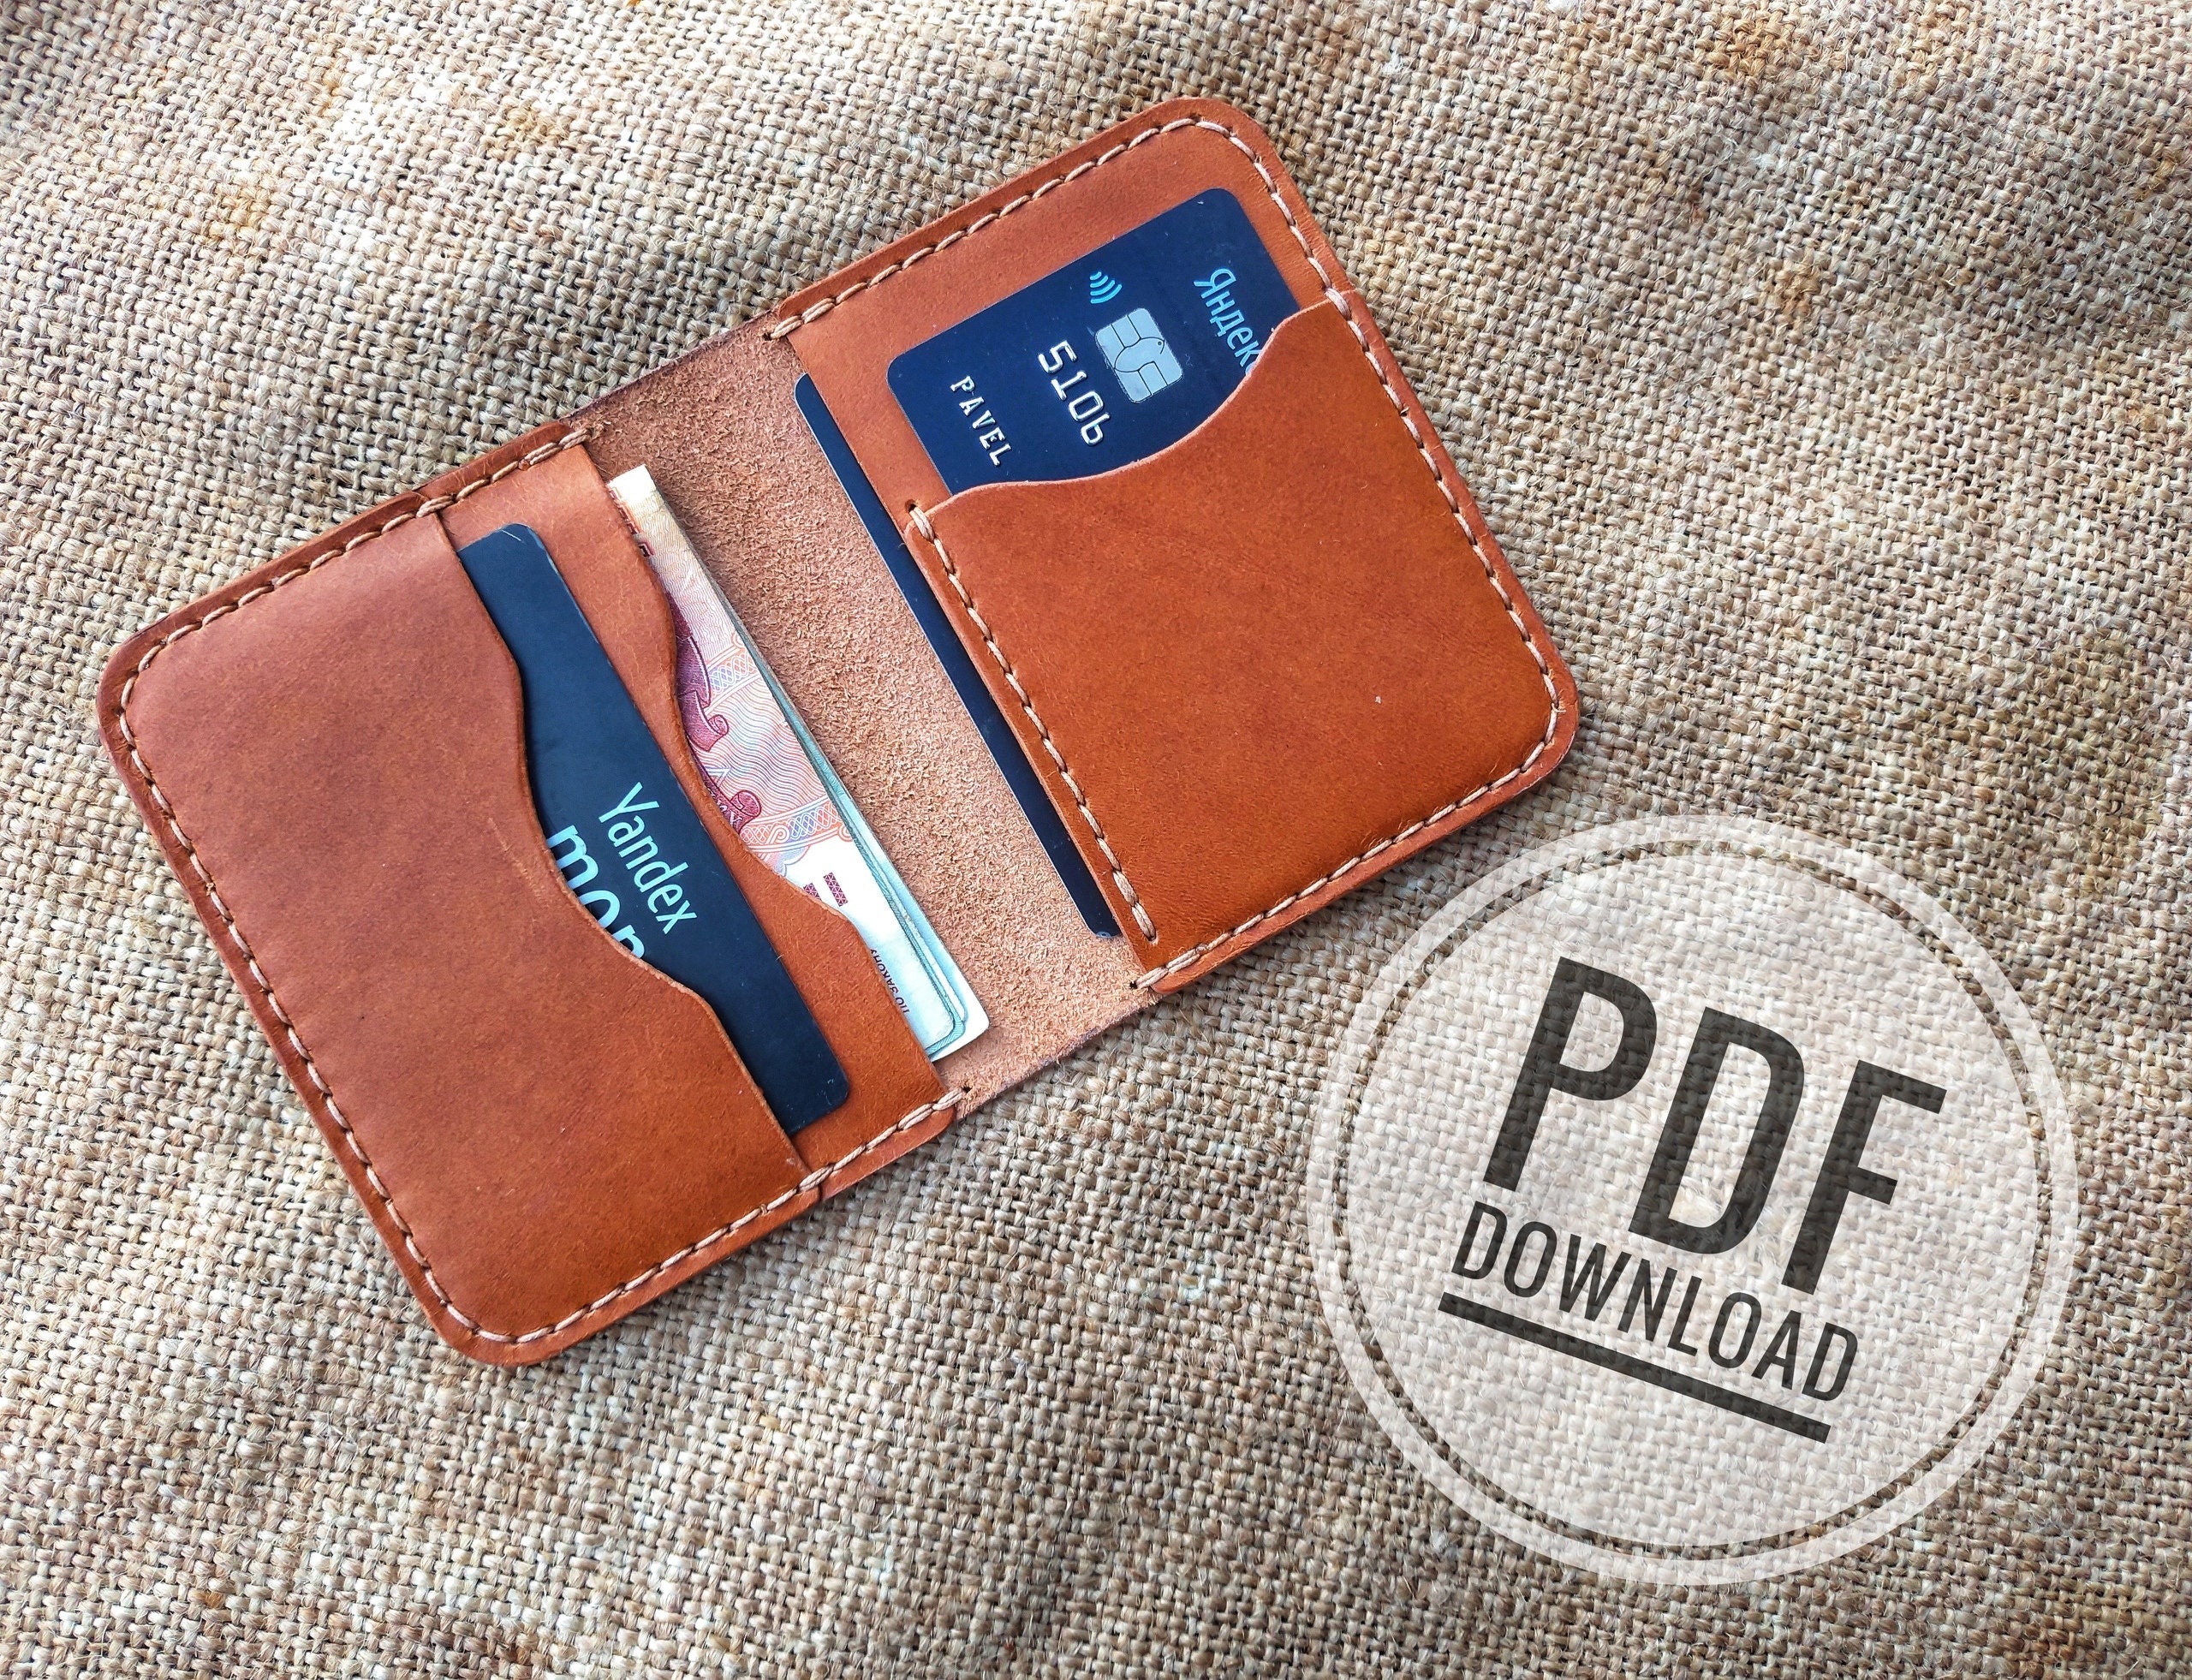 Free Leather Wallet Templates